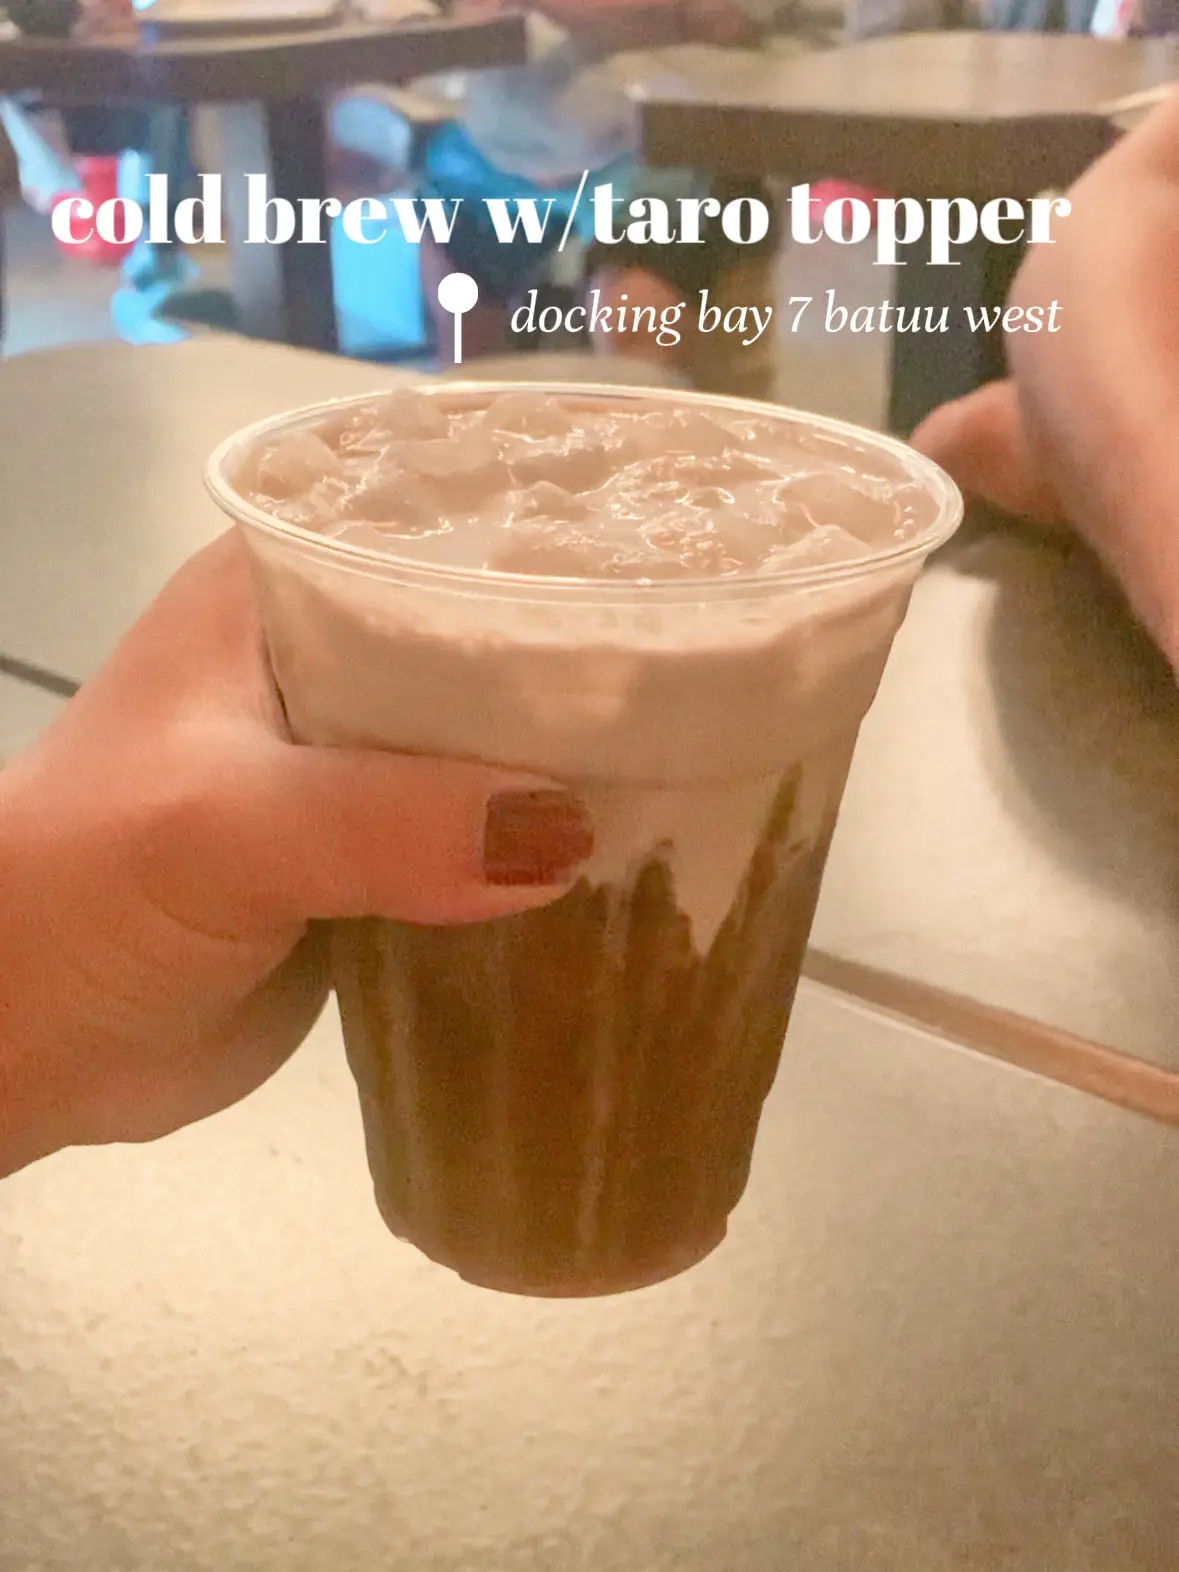 Has anyone else tried the cold brew with taro topper from Docking